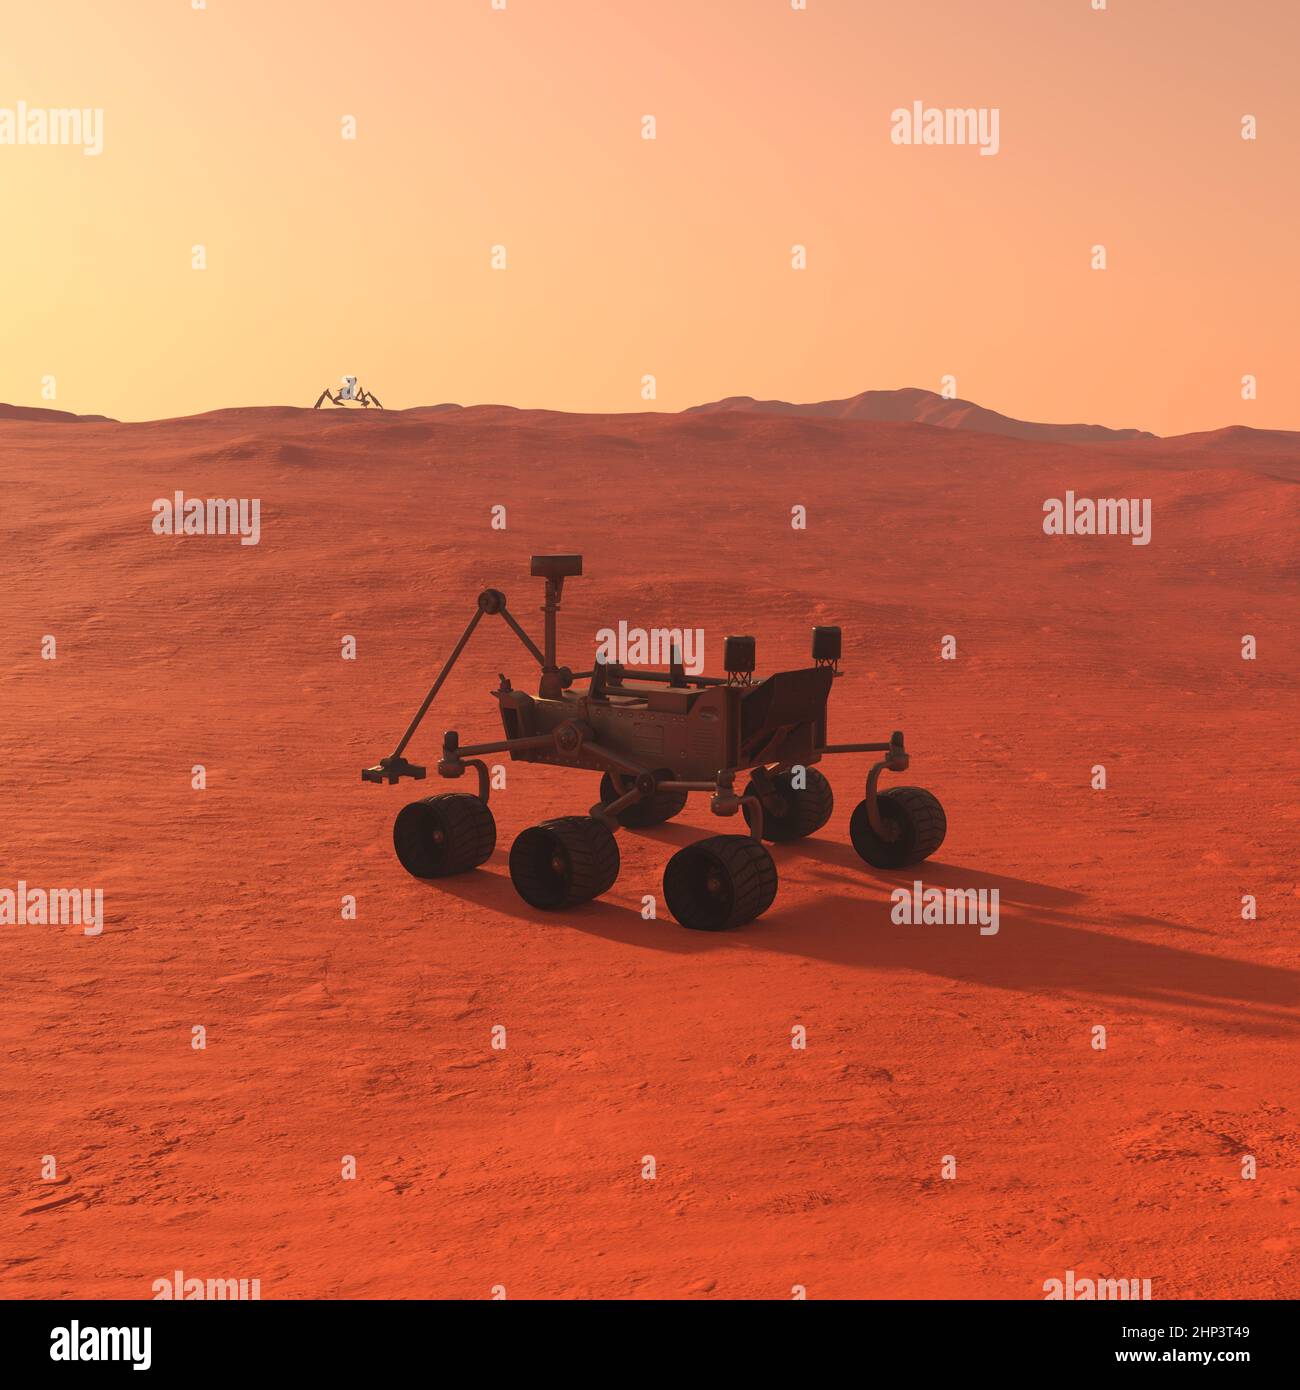 3D-illustration of a rover on a strange planet Stock Photo